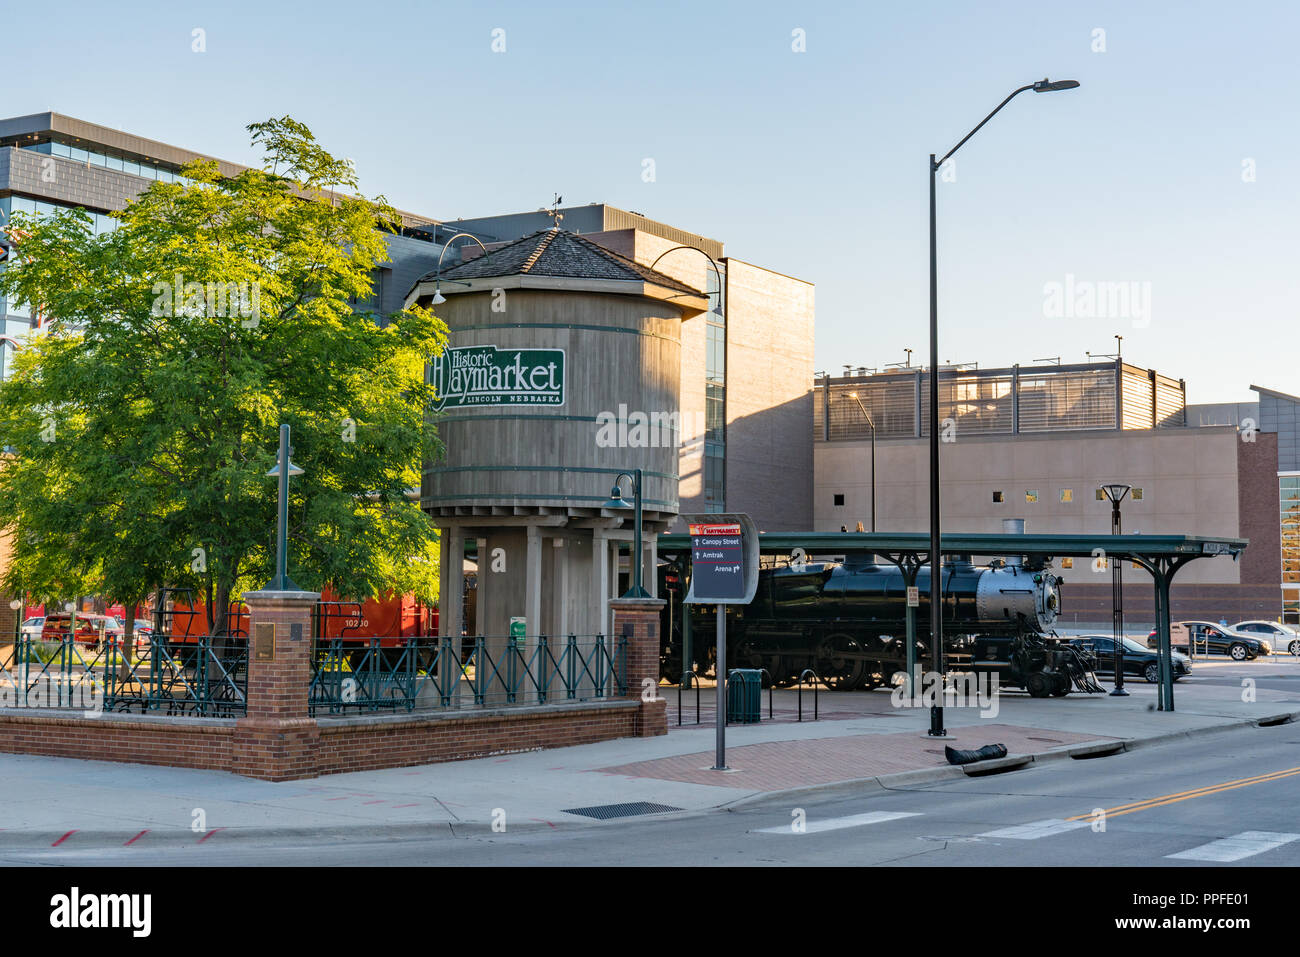 LINCOLN, NE - JULY 10, 2018: Railroad locomotive and water tower in the historic Haymarket District of Lincoln, Nebraska Stock Photo